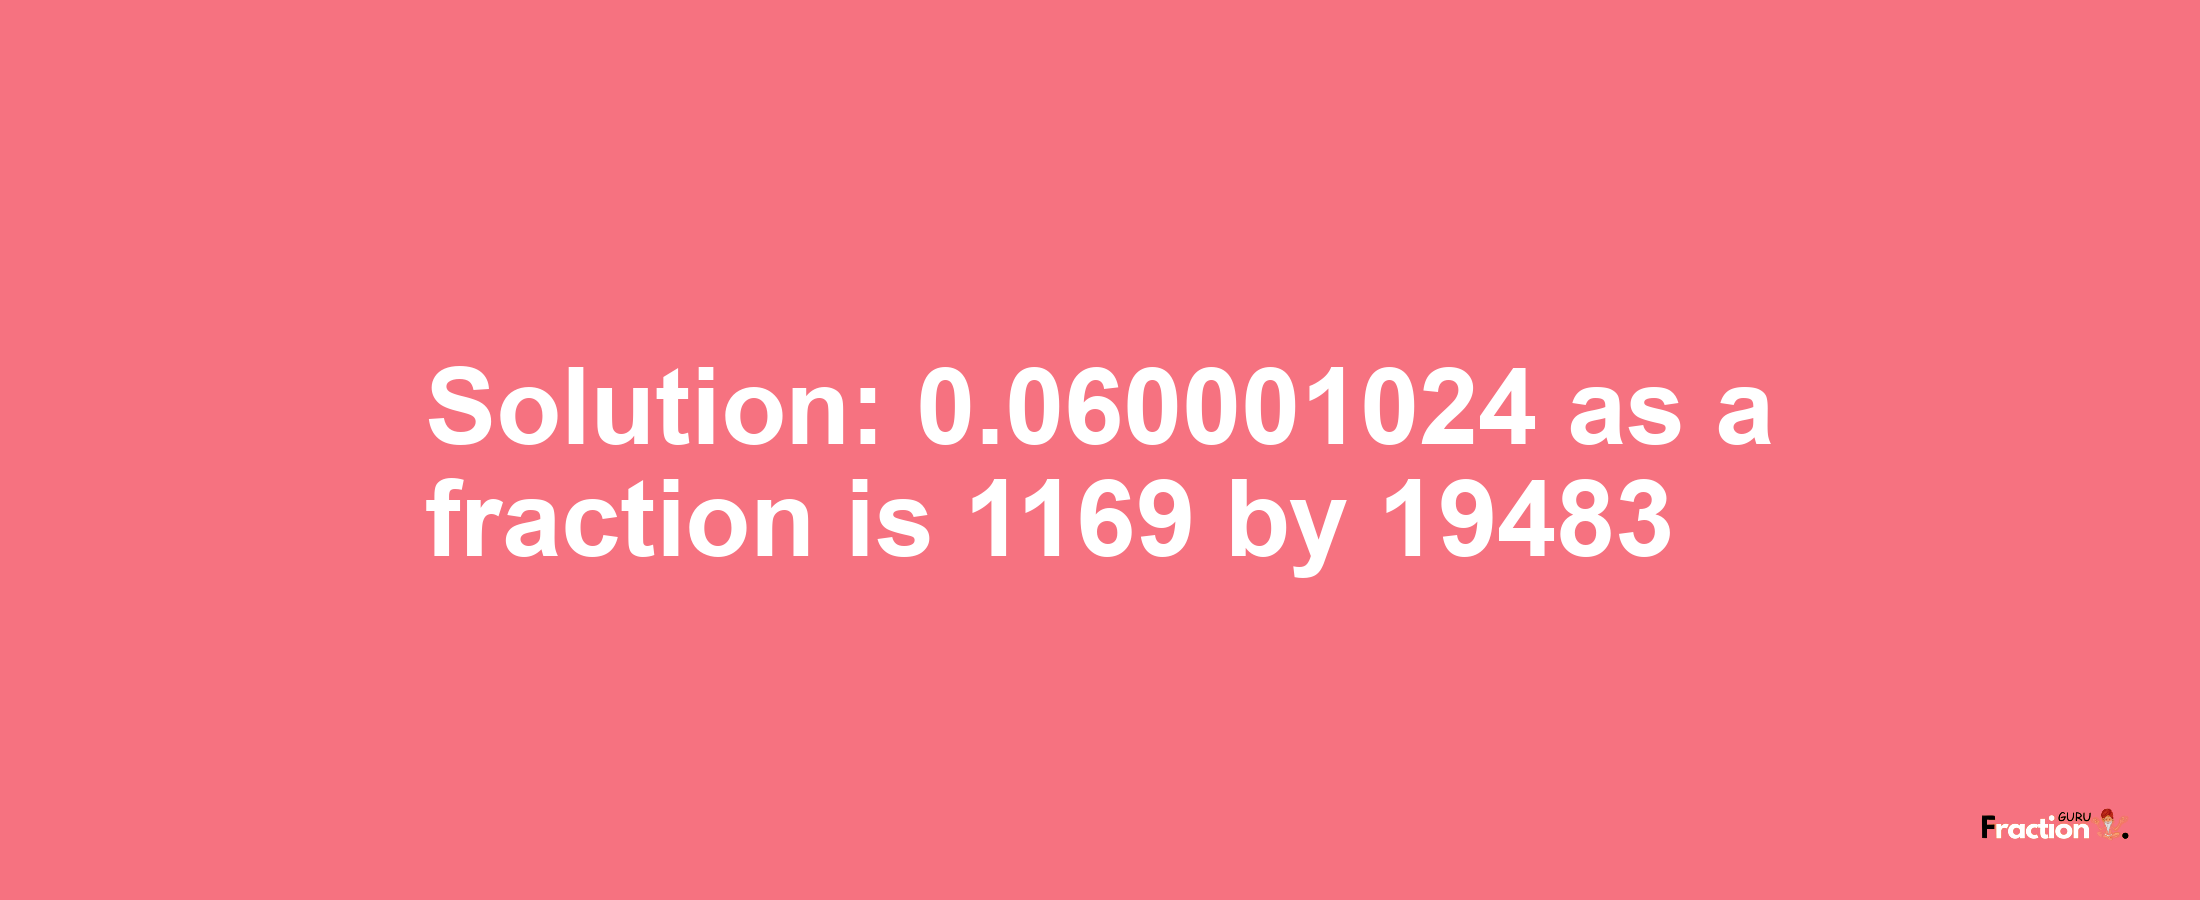 Solution:0.060001024 as a fraction is 1169/19483